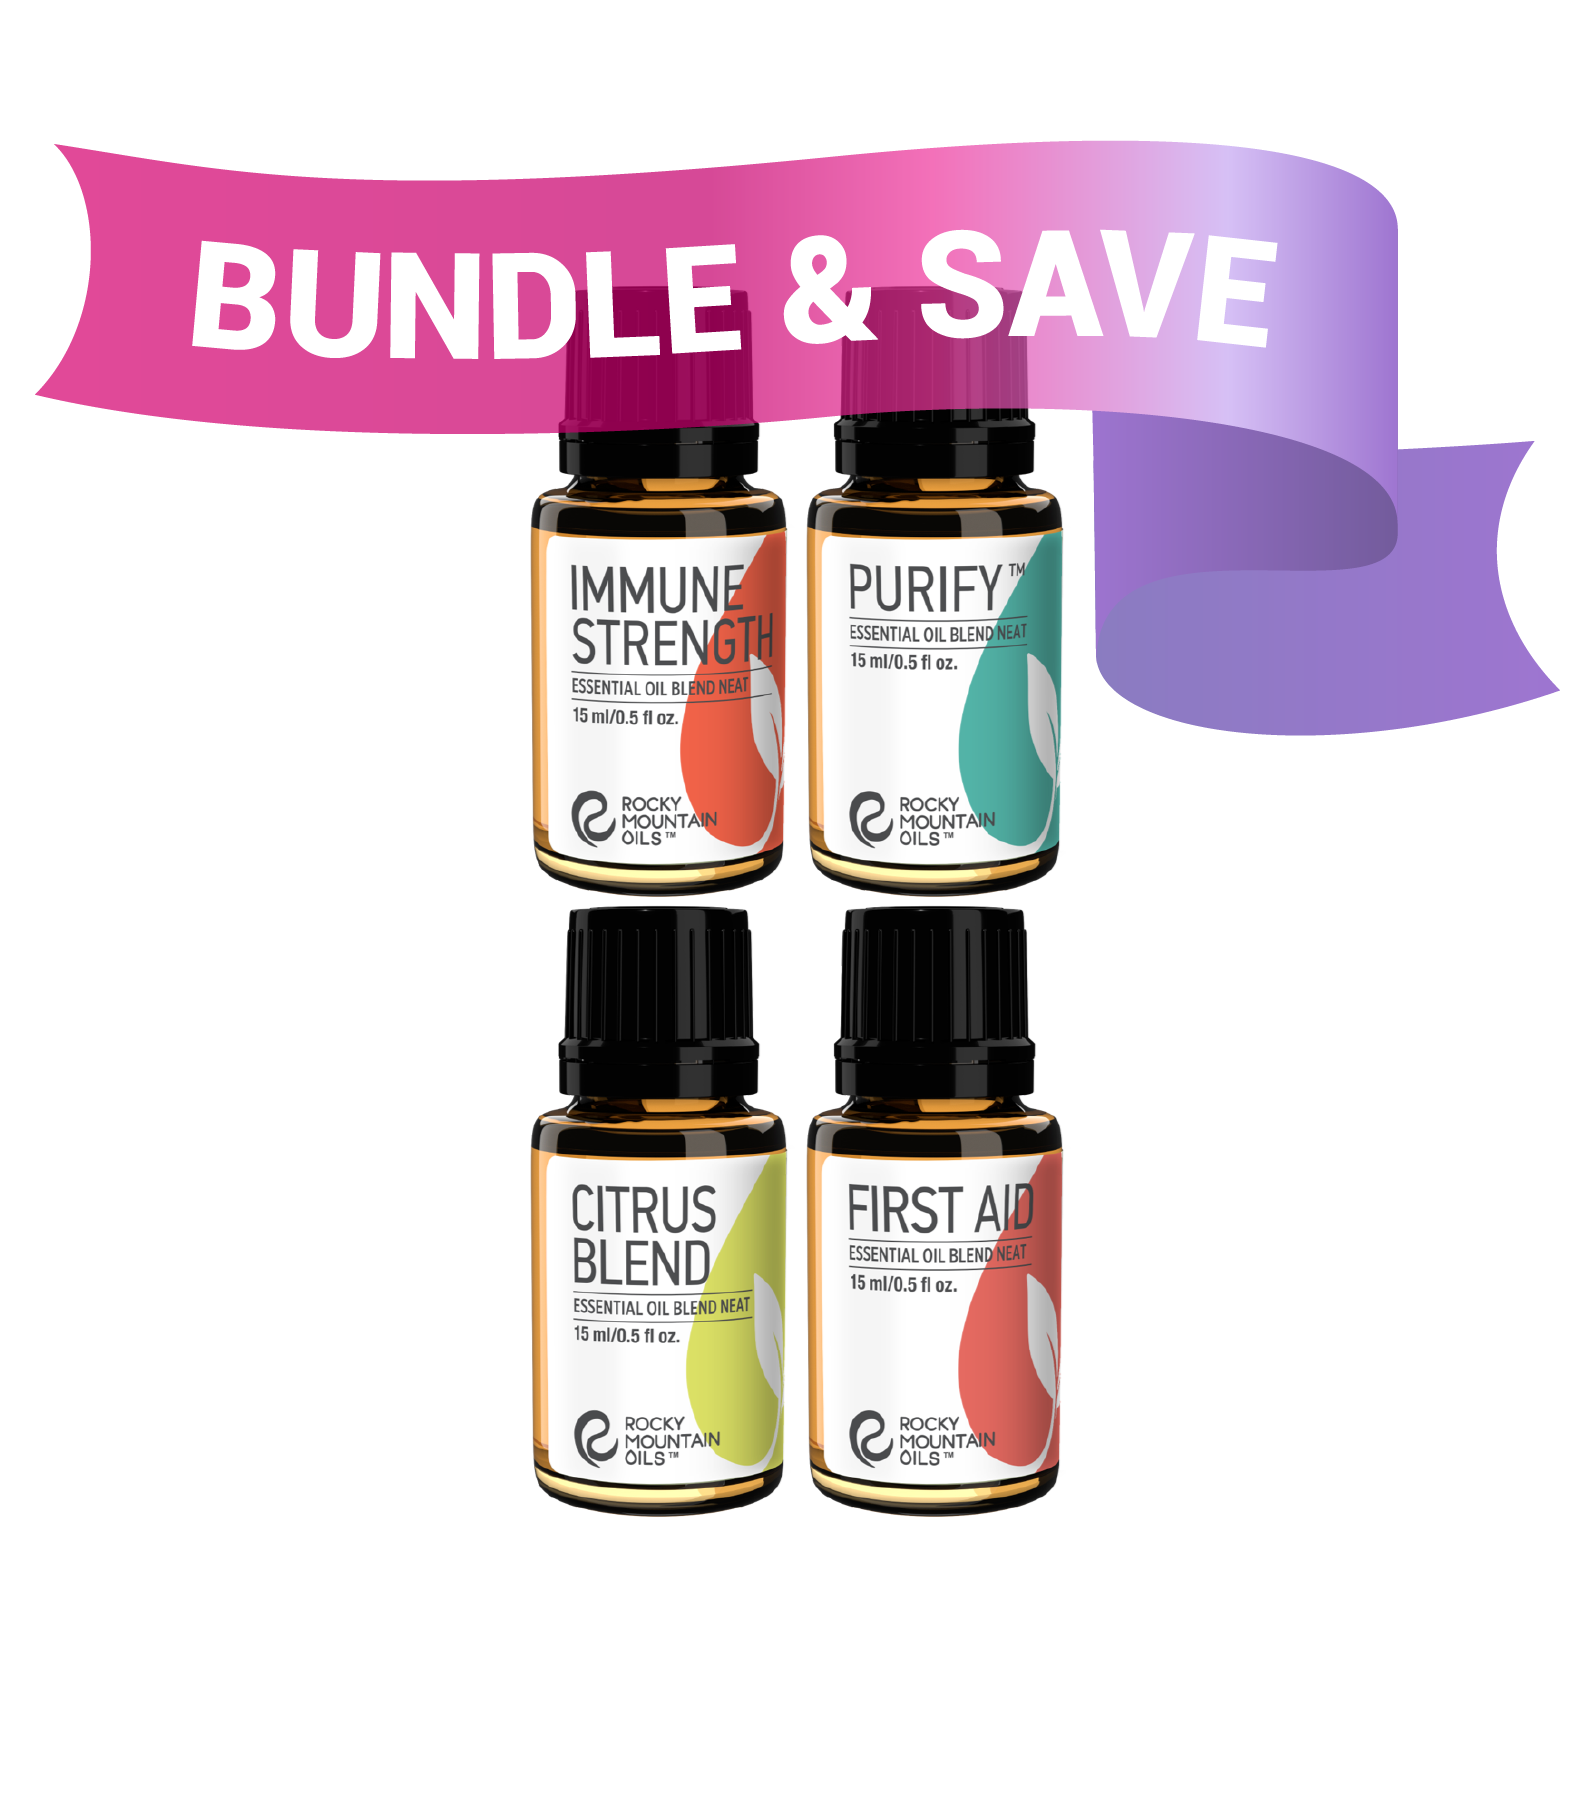 Rocky Mountain Oils - Everyday Blends Kit - Includes 100% Pure Citrus Blend, Immune Strength, First Aid, at Peace, Purify, and Breathe Ease